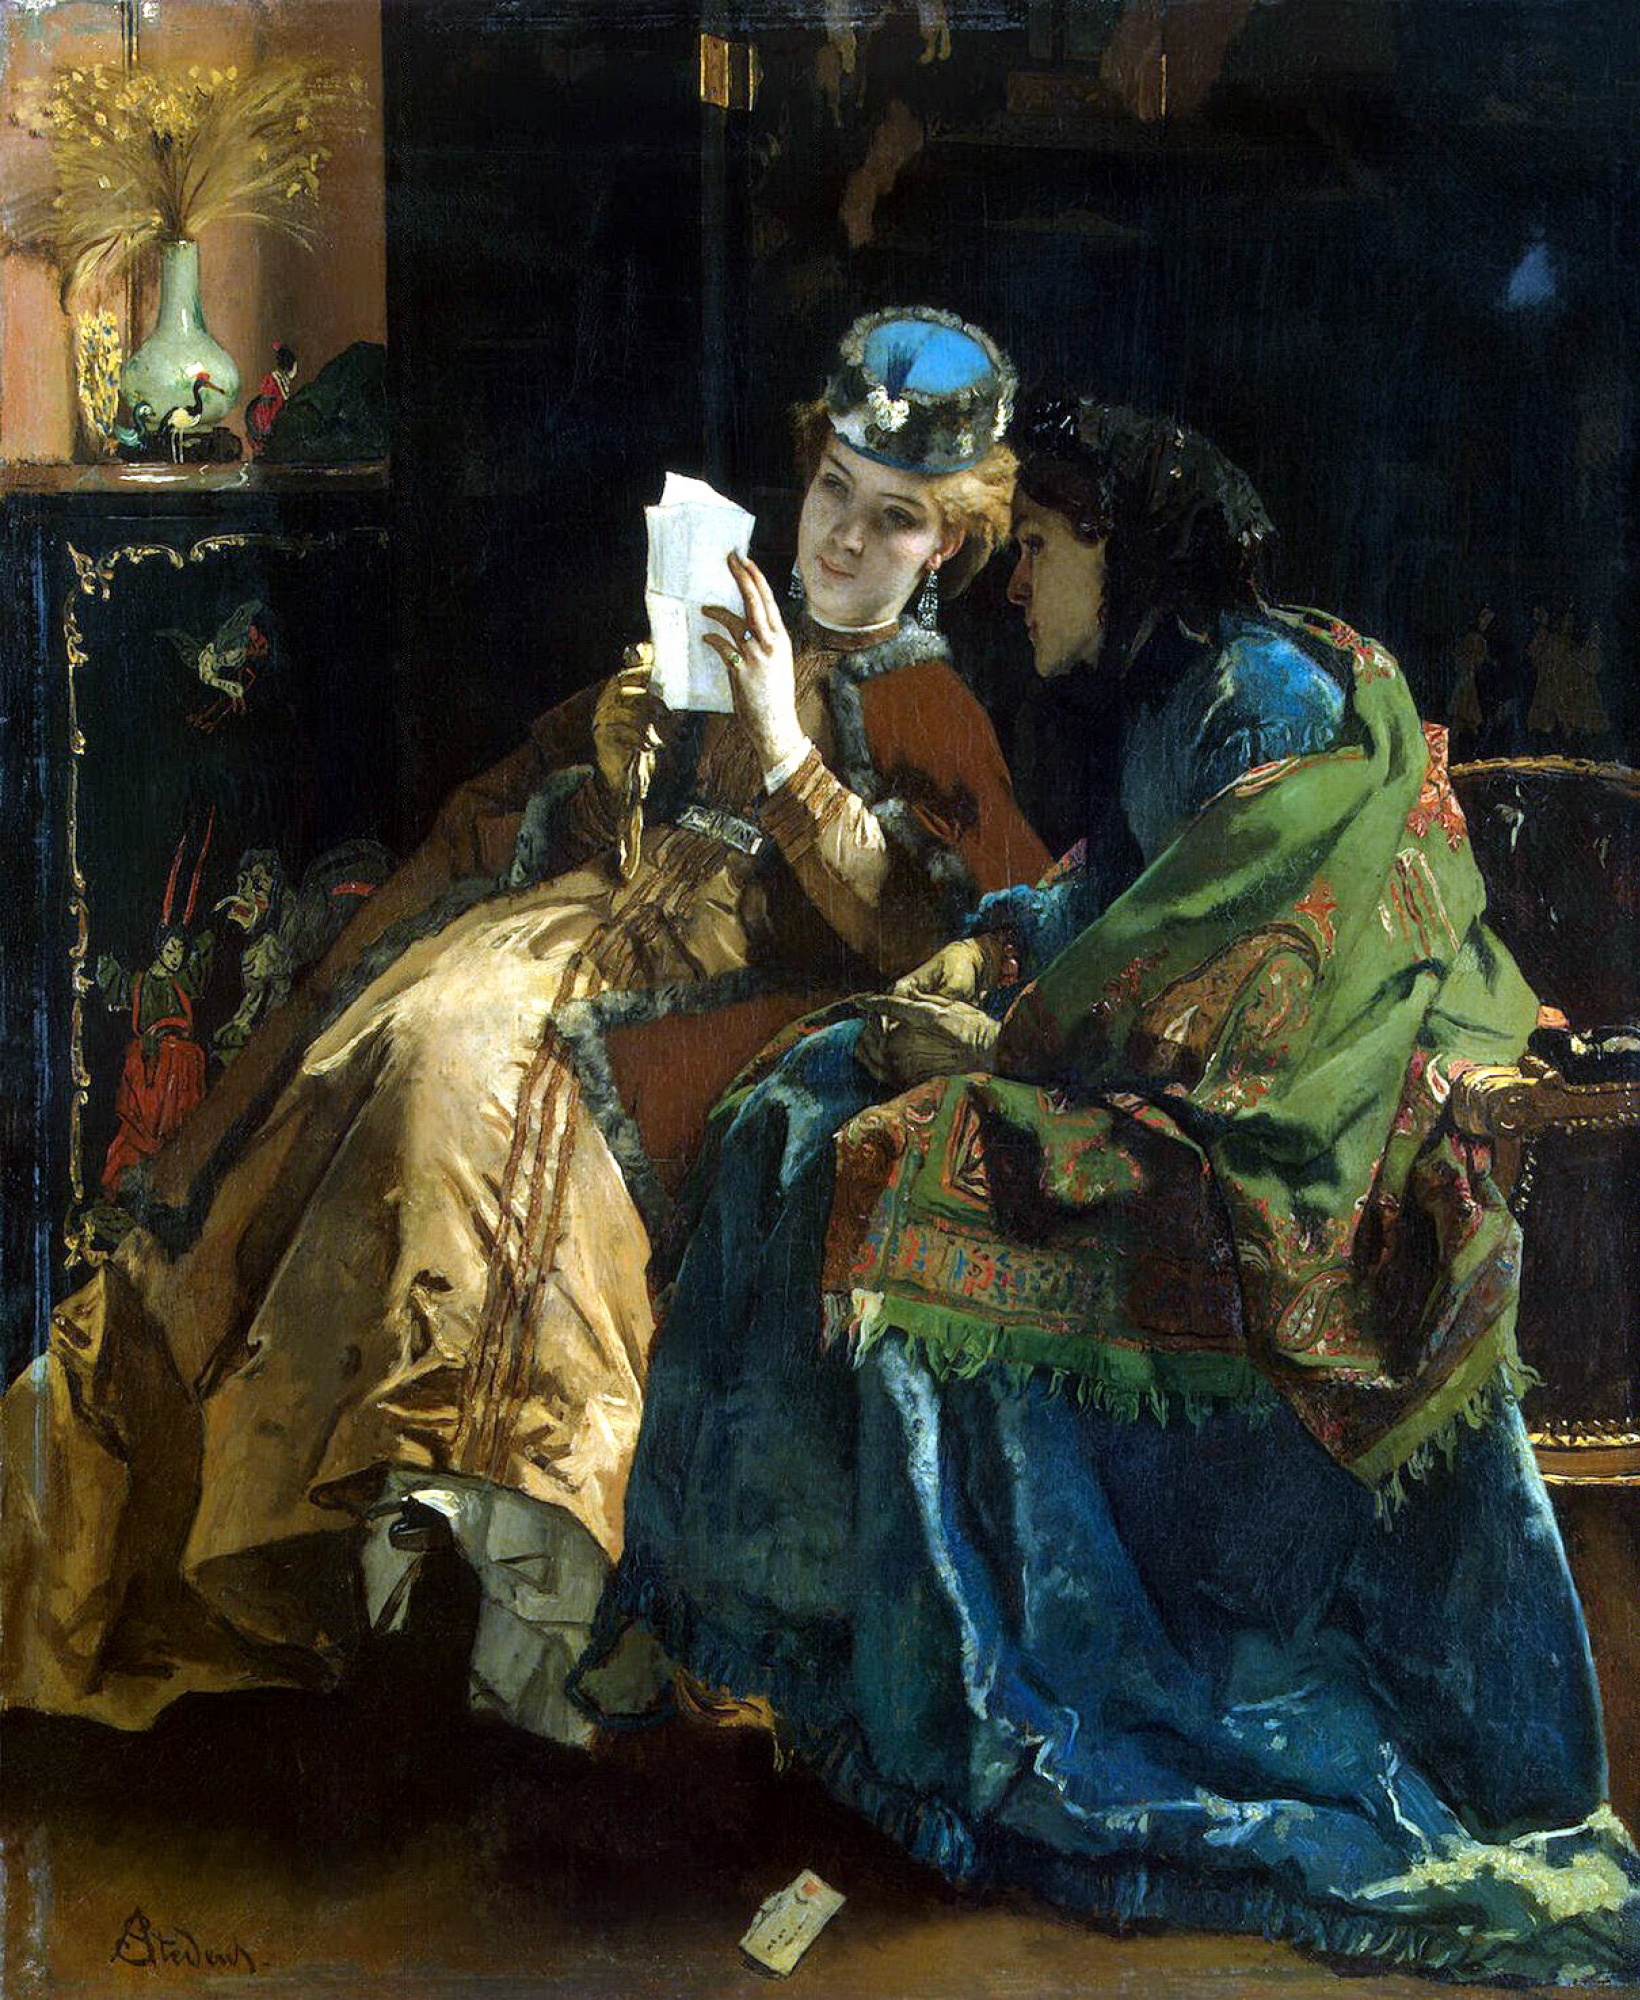 A nice letter by Alfred Stevens: History, Analysis & Facts | Arthive